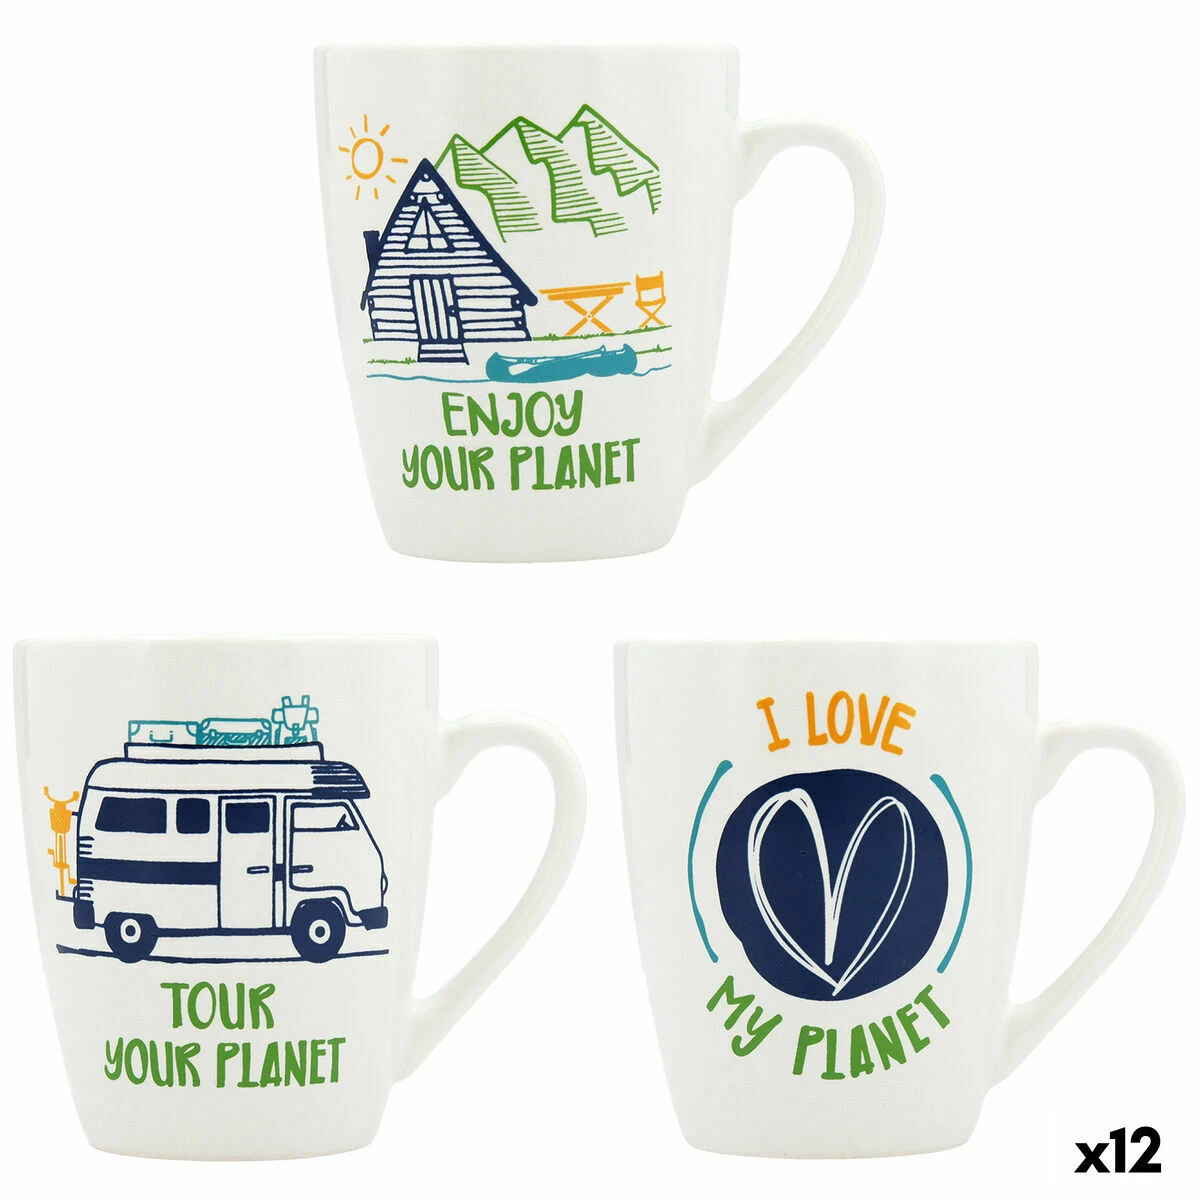 Eco-themed mugs, 'Enjoy Your Planet', 'Tour Your Planet', 'I Love My Planet'